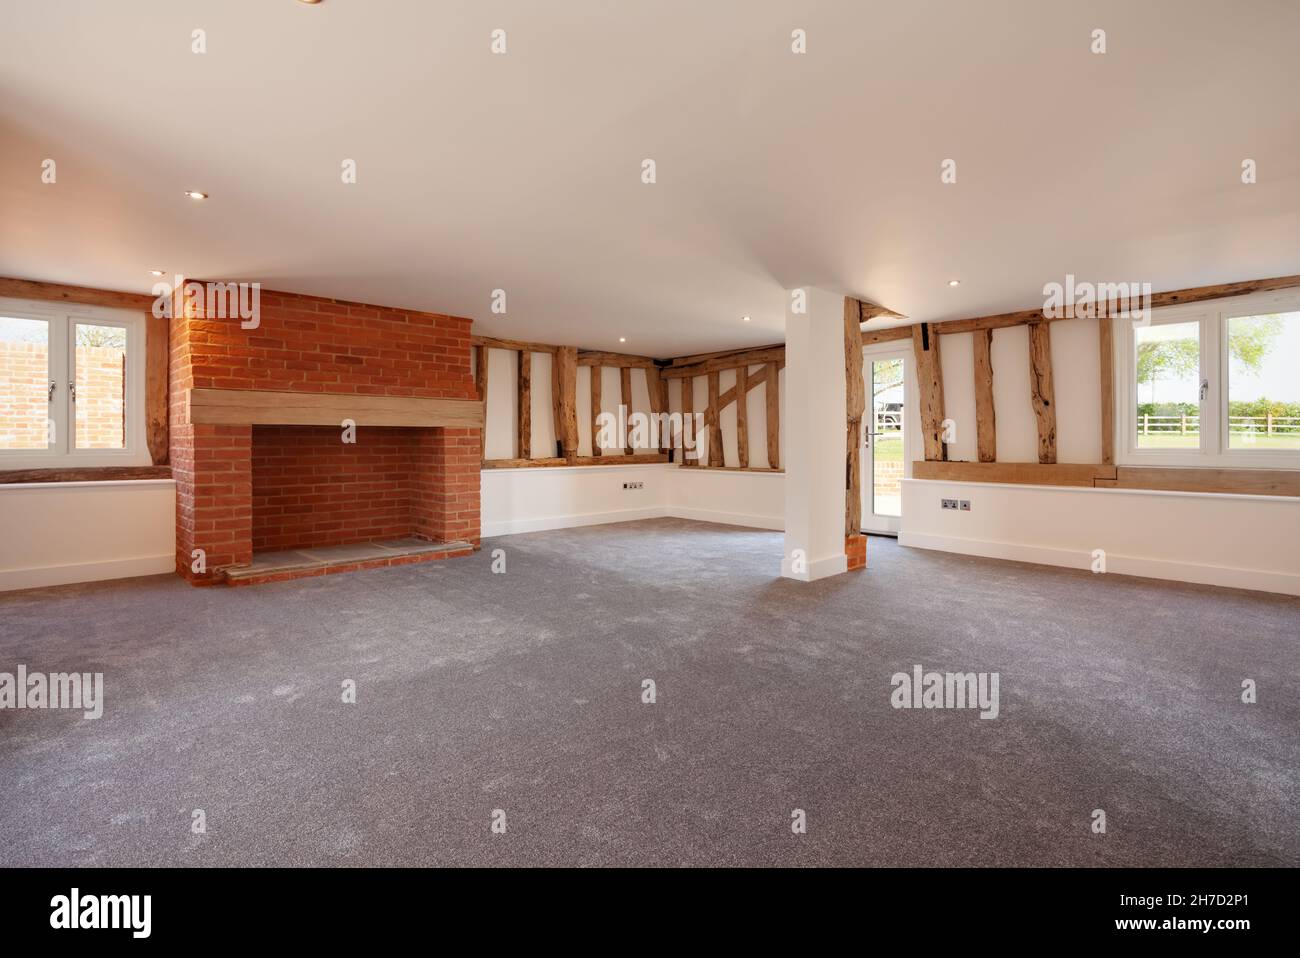 Great Sampford, Essex - April 16 2020: Empty living room within large recently converted barn with exposed timbers and inglenook fireplace. Stock Photo